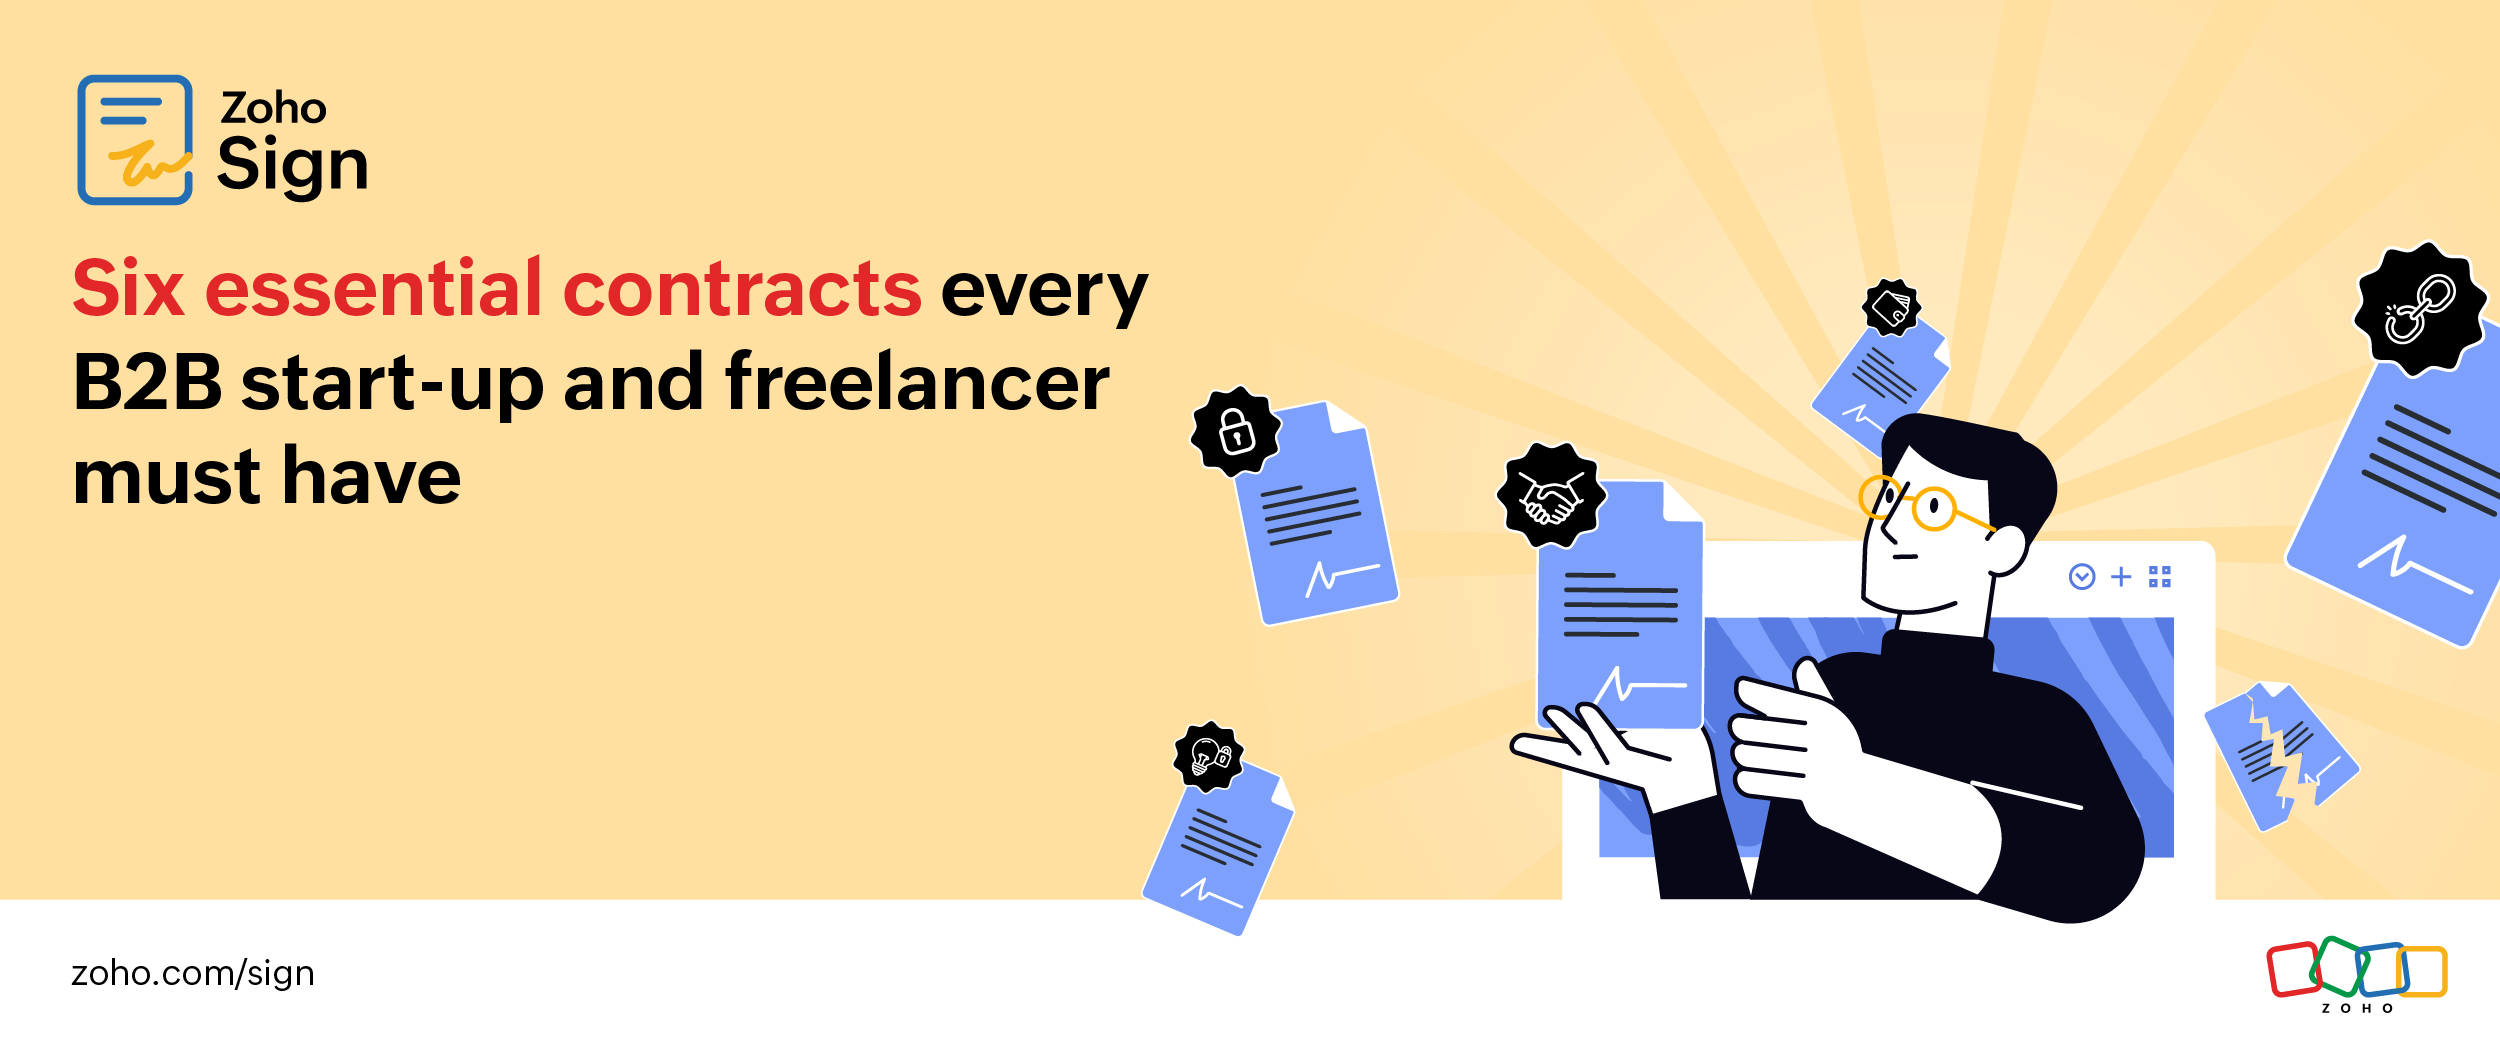 Six essential contracts every B2B startup and freelancer must have